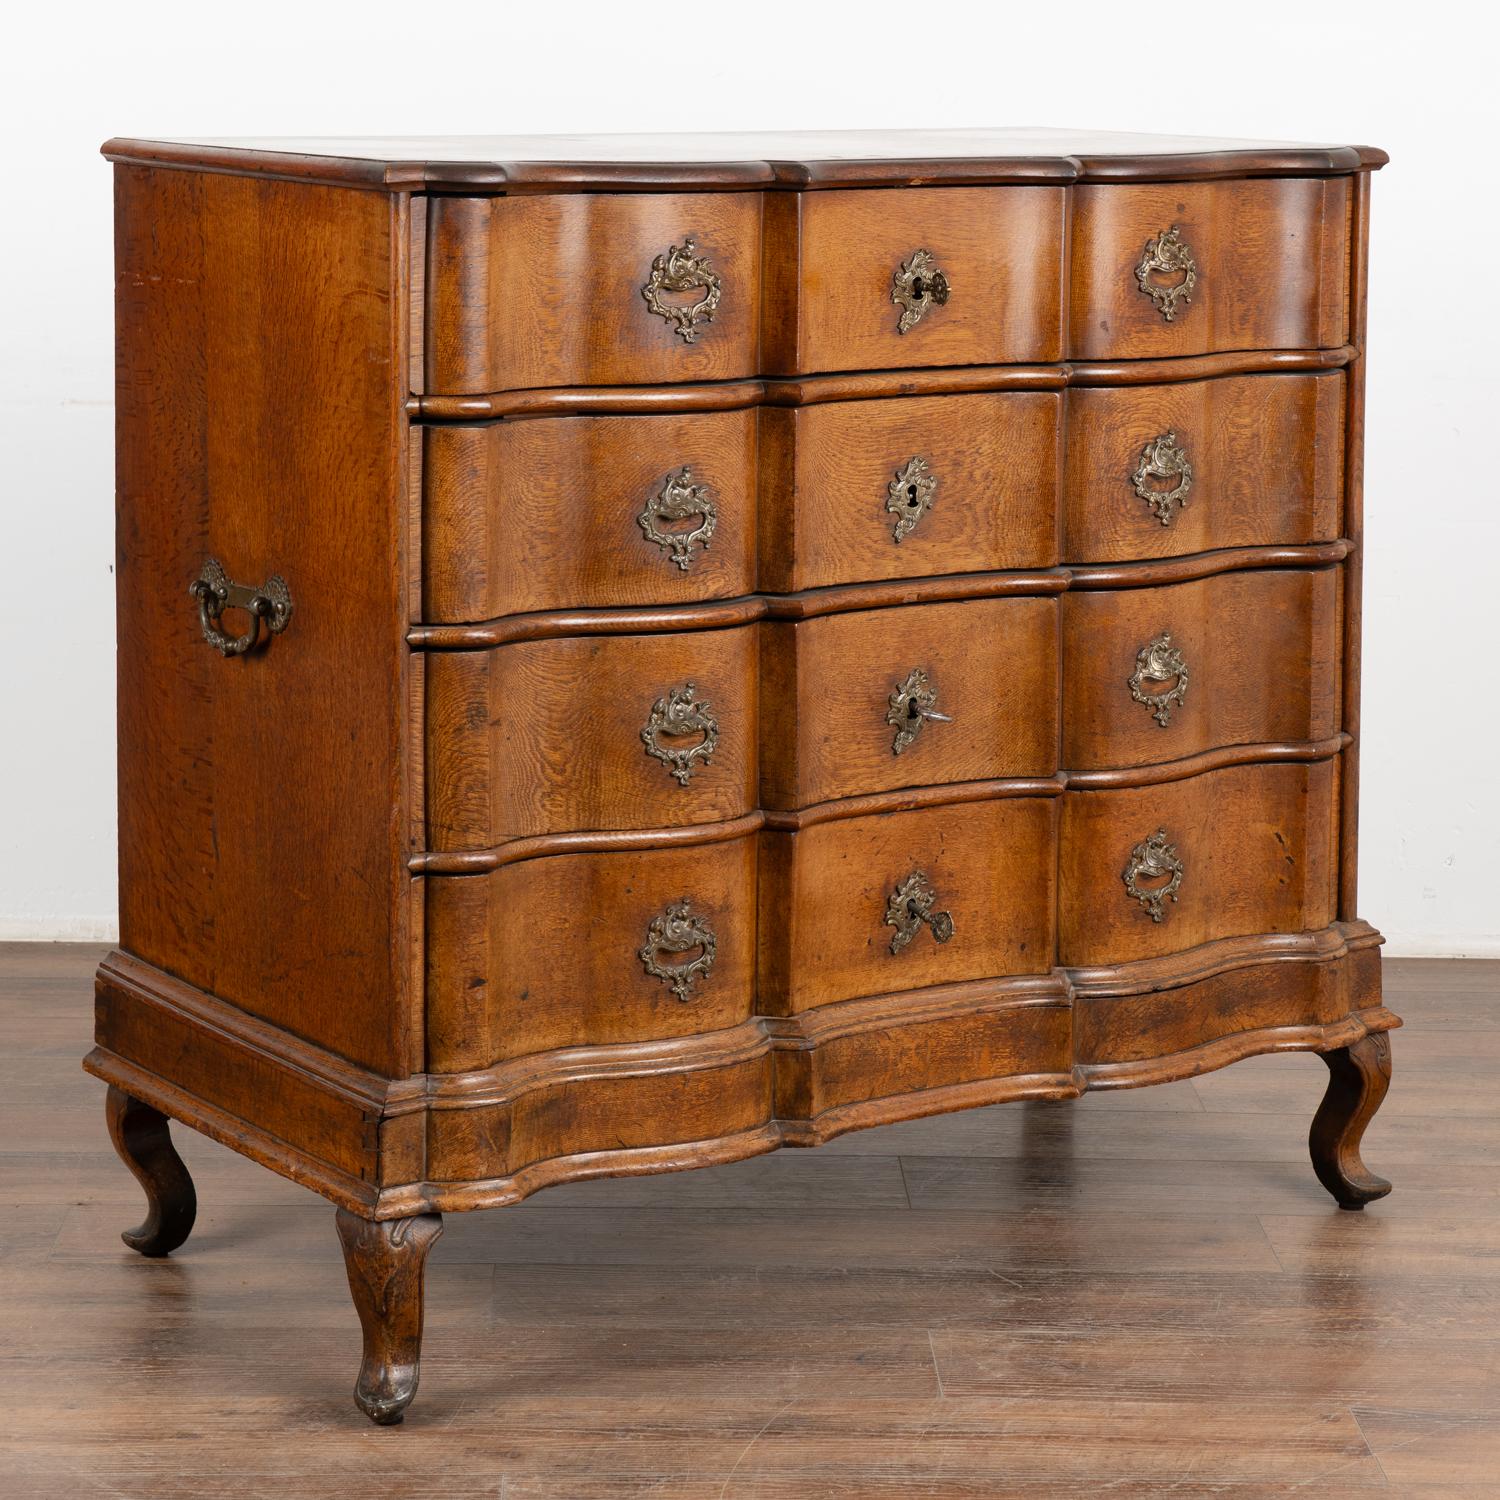 This large antique rococo oak chest of drawers features a serpentine front, handsome brass hardware pulls and rests on cabriolet feet.
This chest has been restored, case is sturdy and drawers function. Key is used in each of the five drawers in